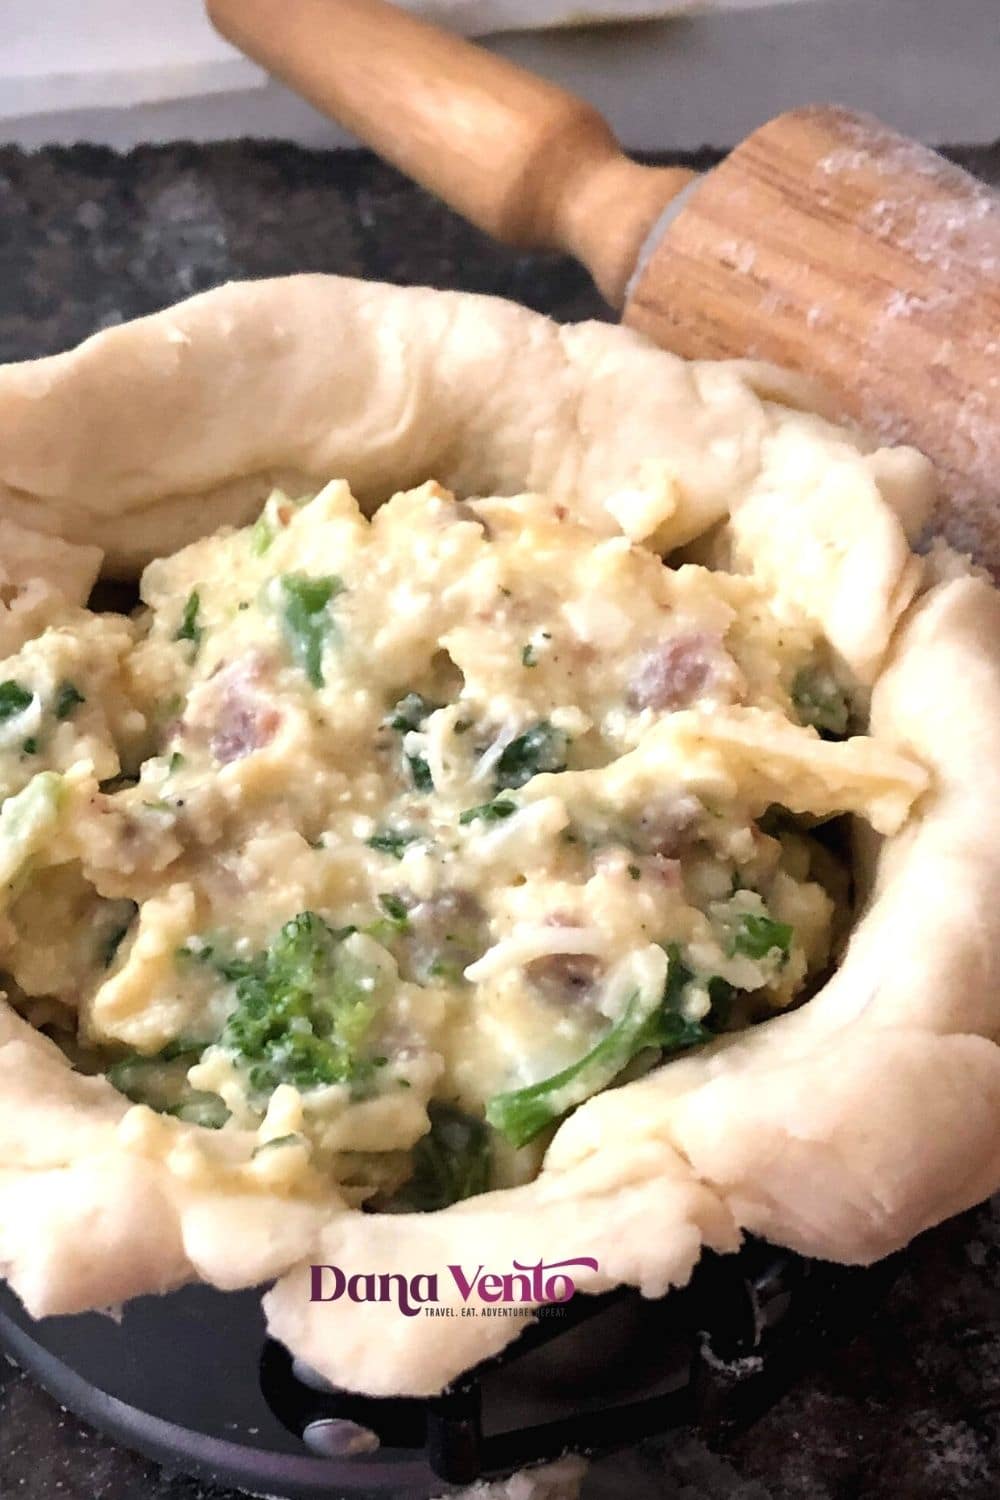 Ricotta Egg Filling and the Sausage and Broccoli Rabe in Italian Meat Pie